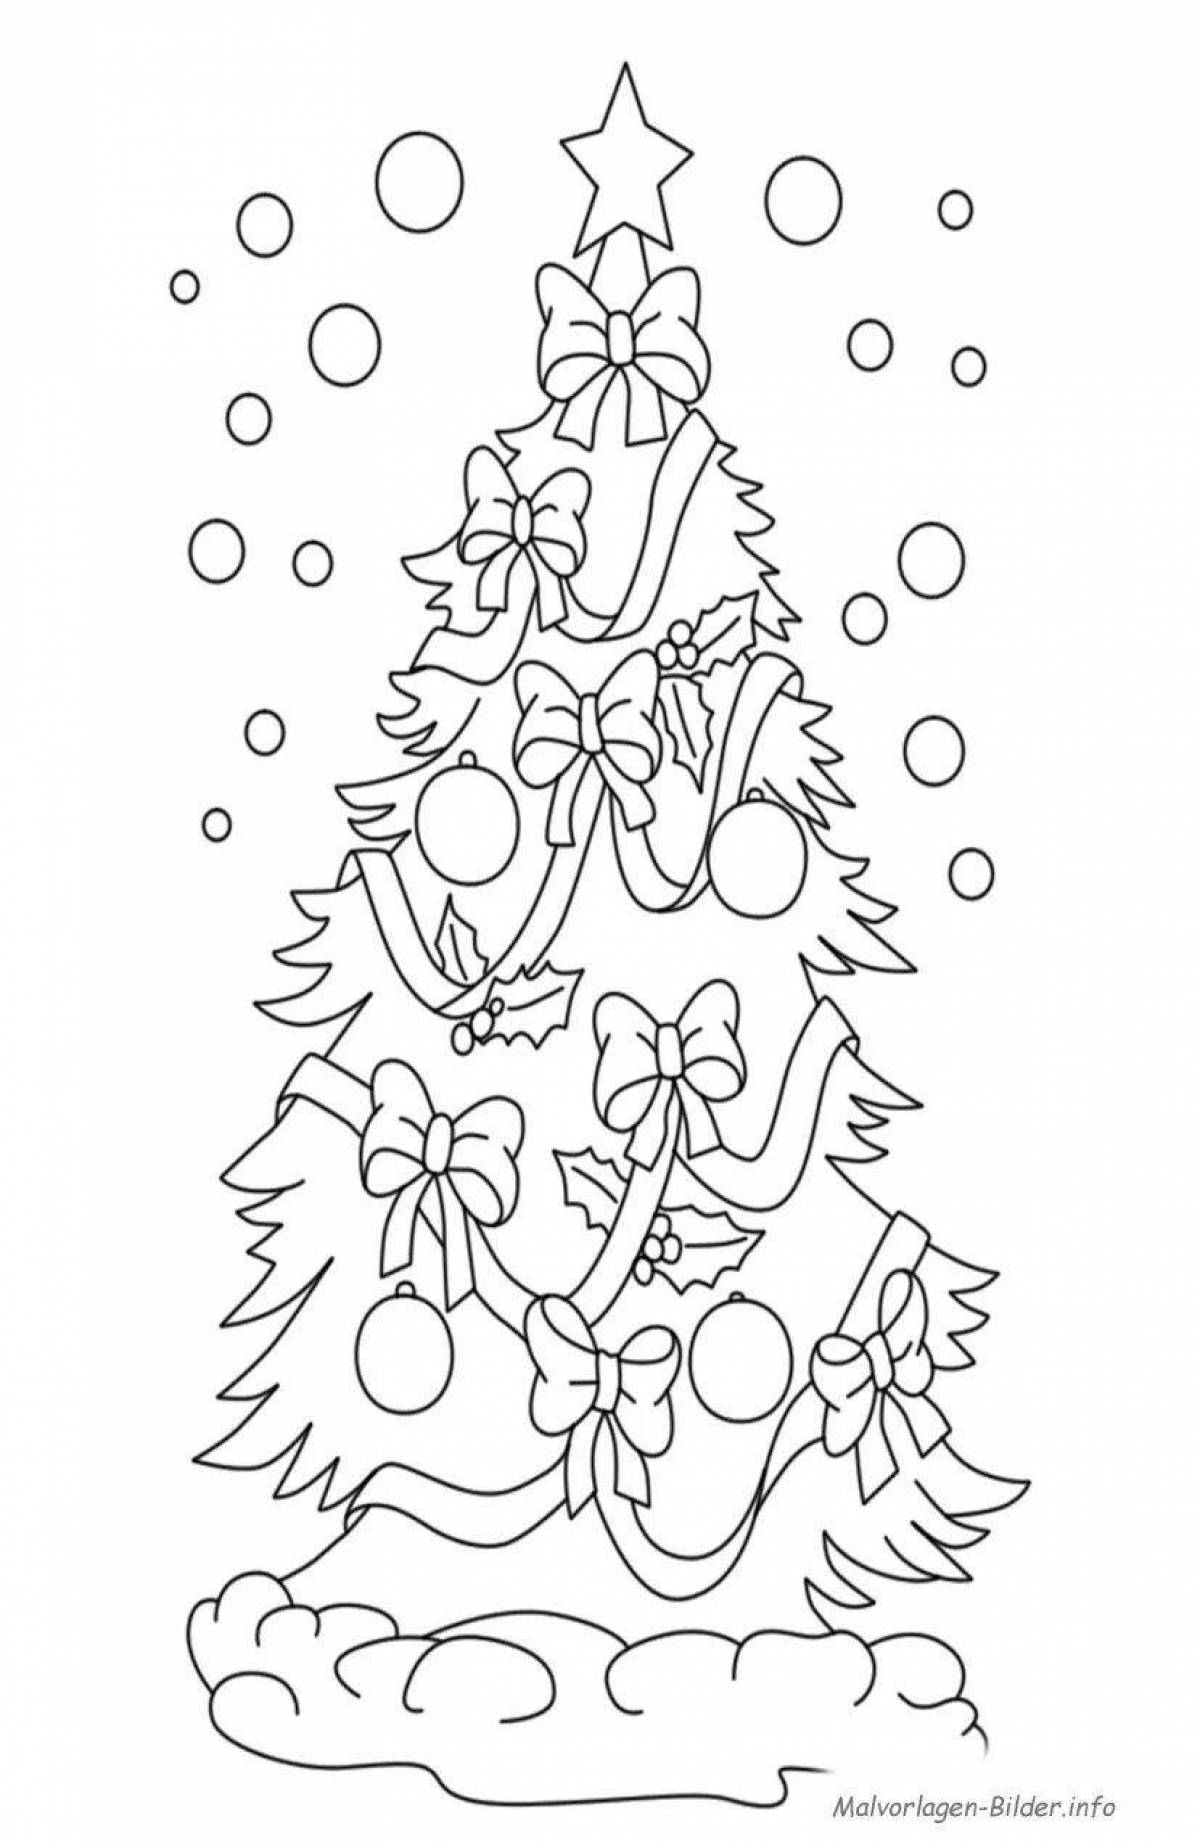 Colored Christmas story coloring book